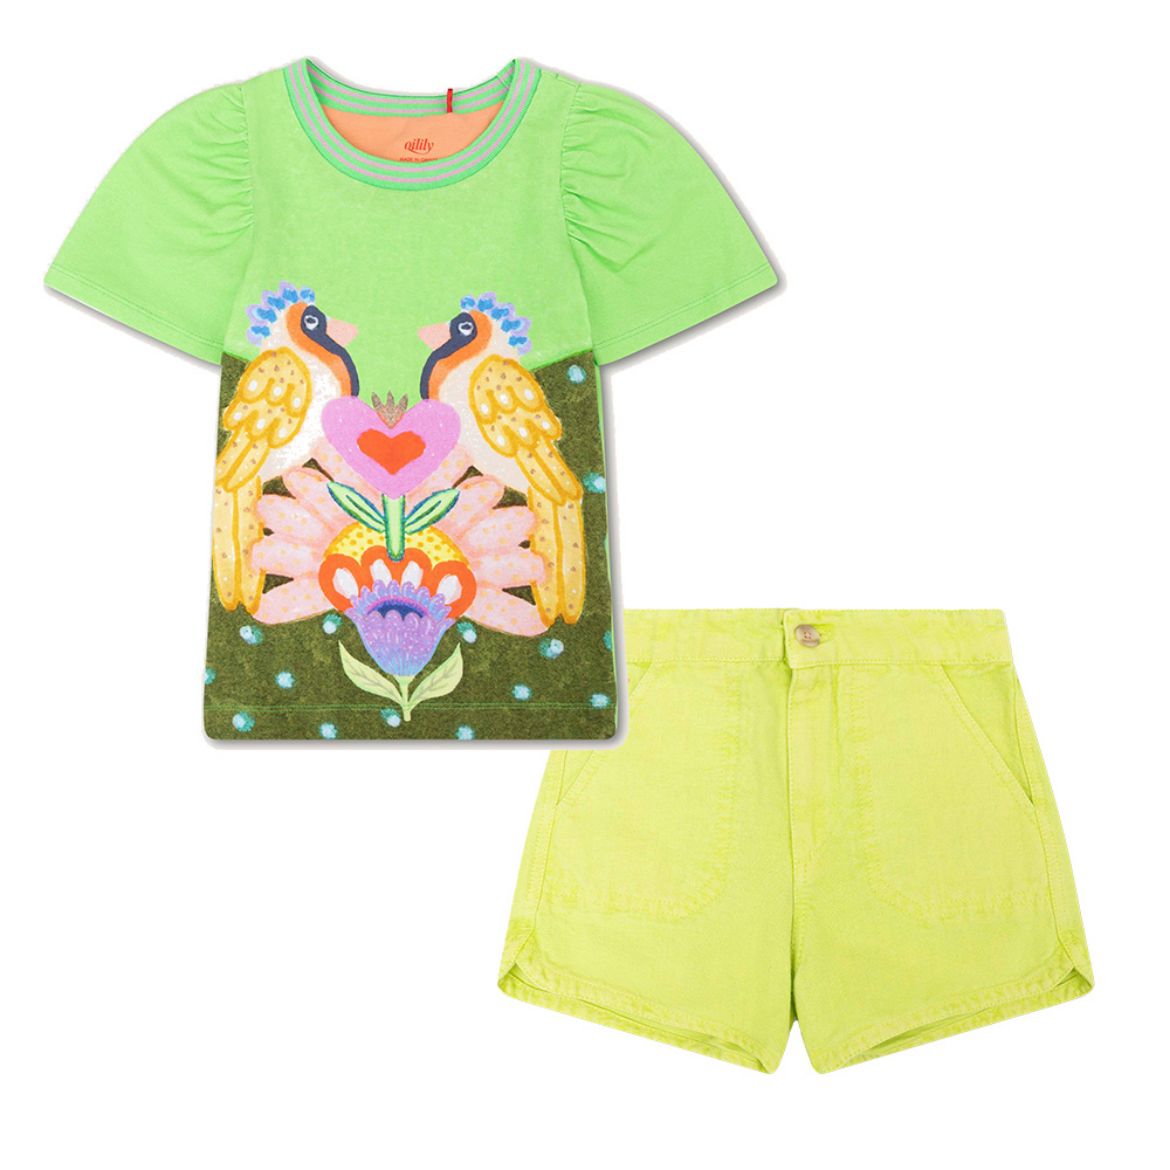 Picture of Oilily Girls Tuintje T-Shirt & Parade Green Short Set